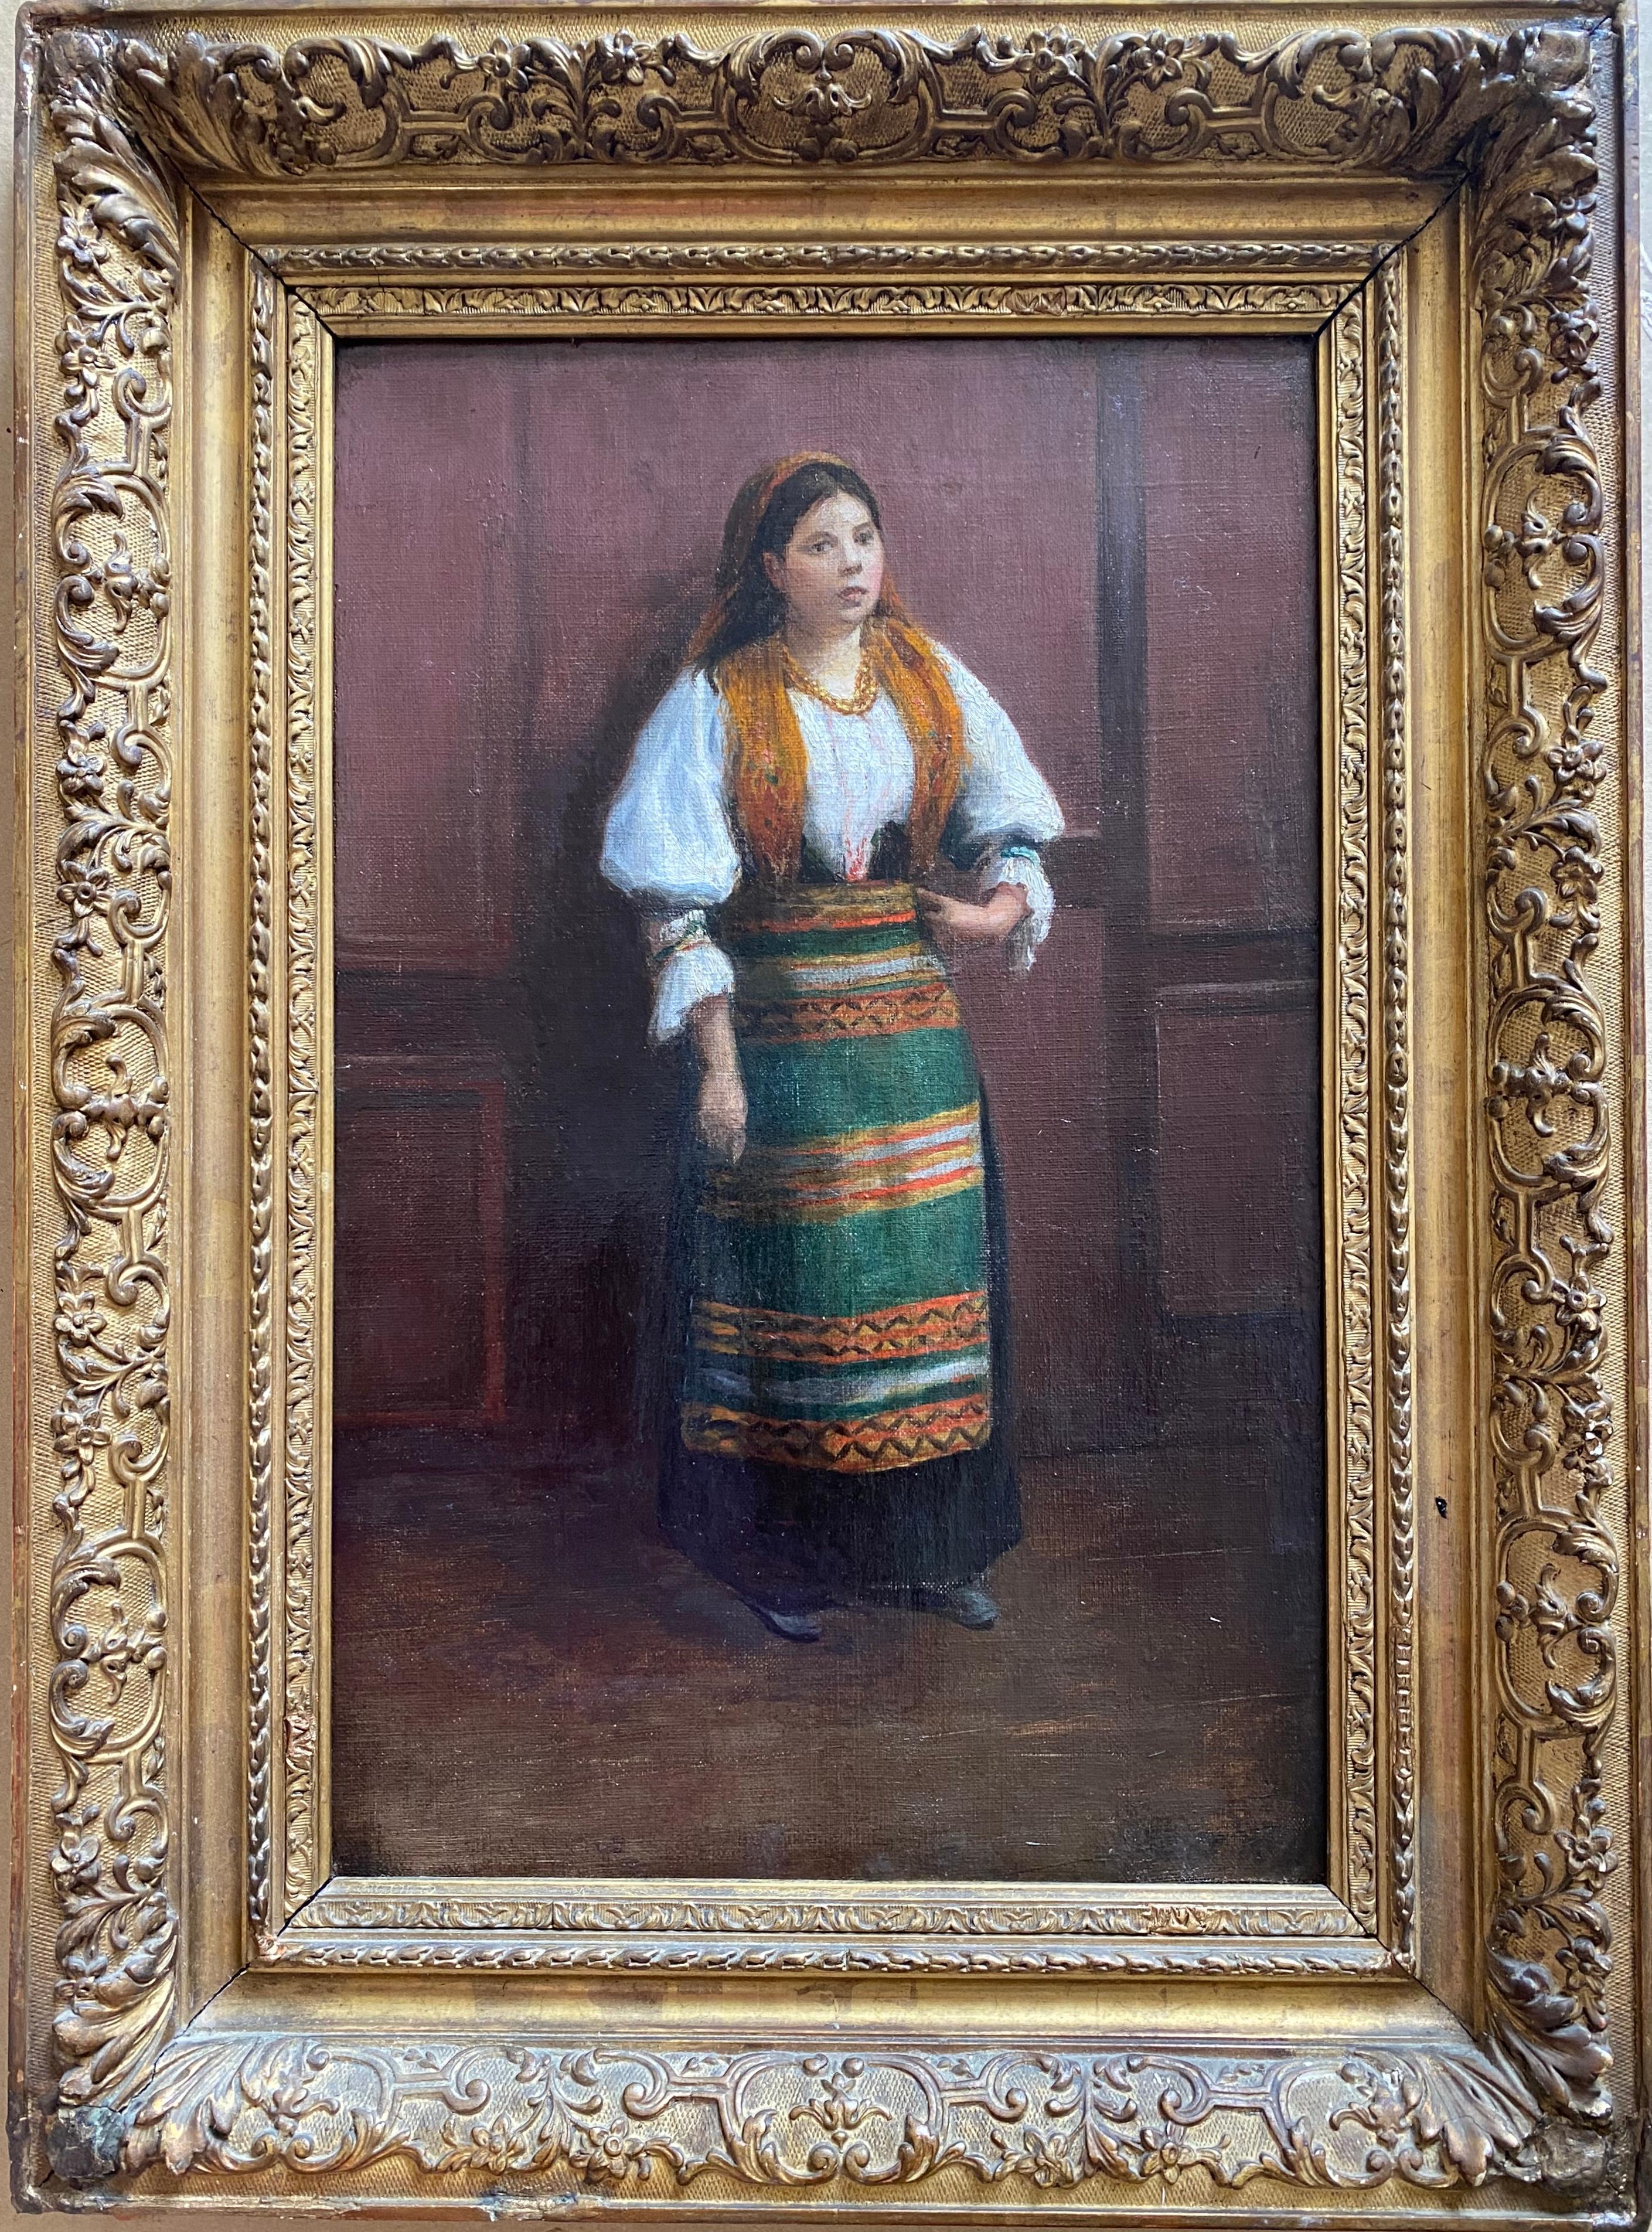 Unknown Portrait Painting - The first time model: the enigmatic young bohemian girl in traditional dress  